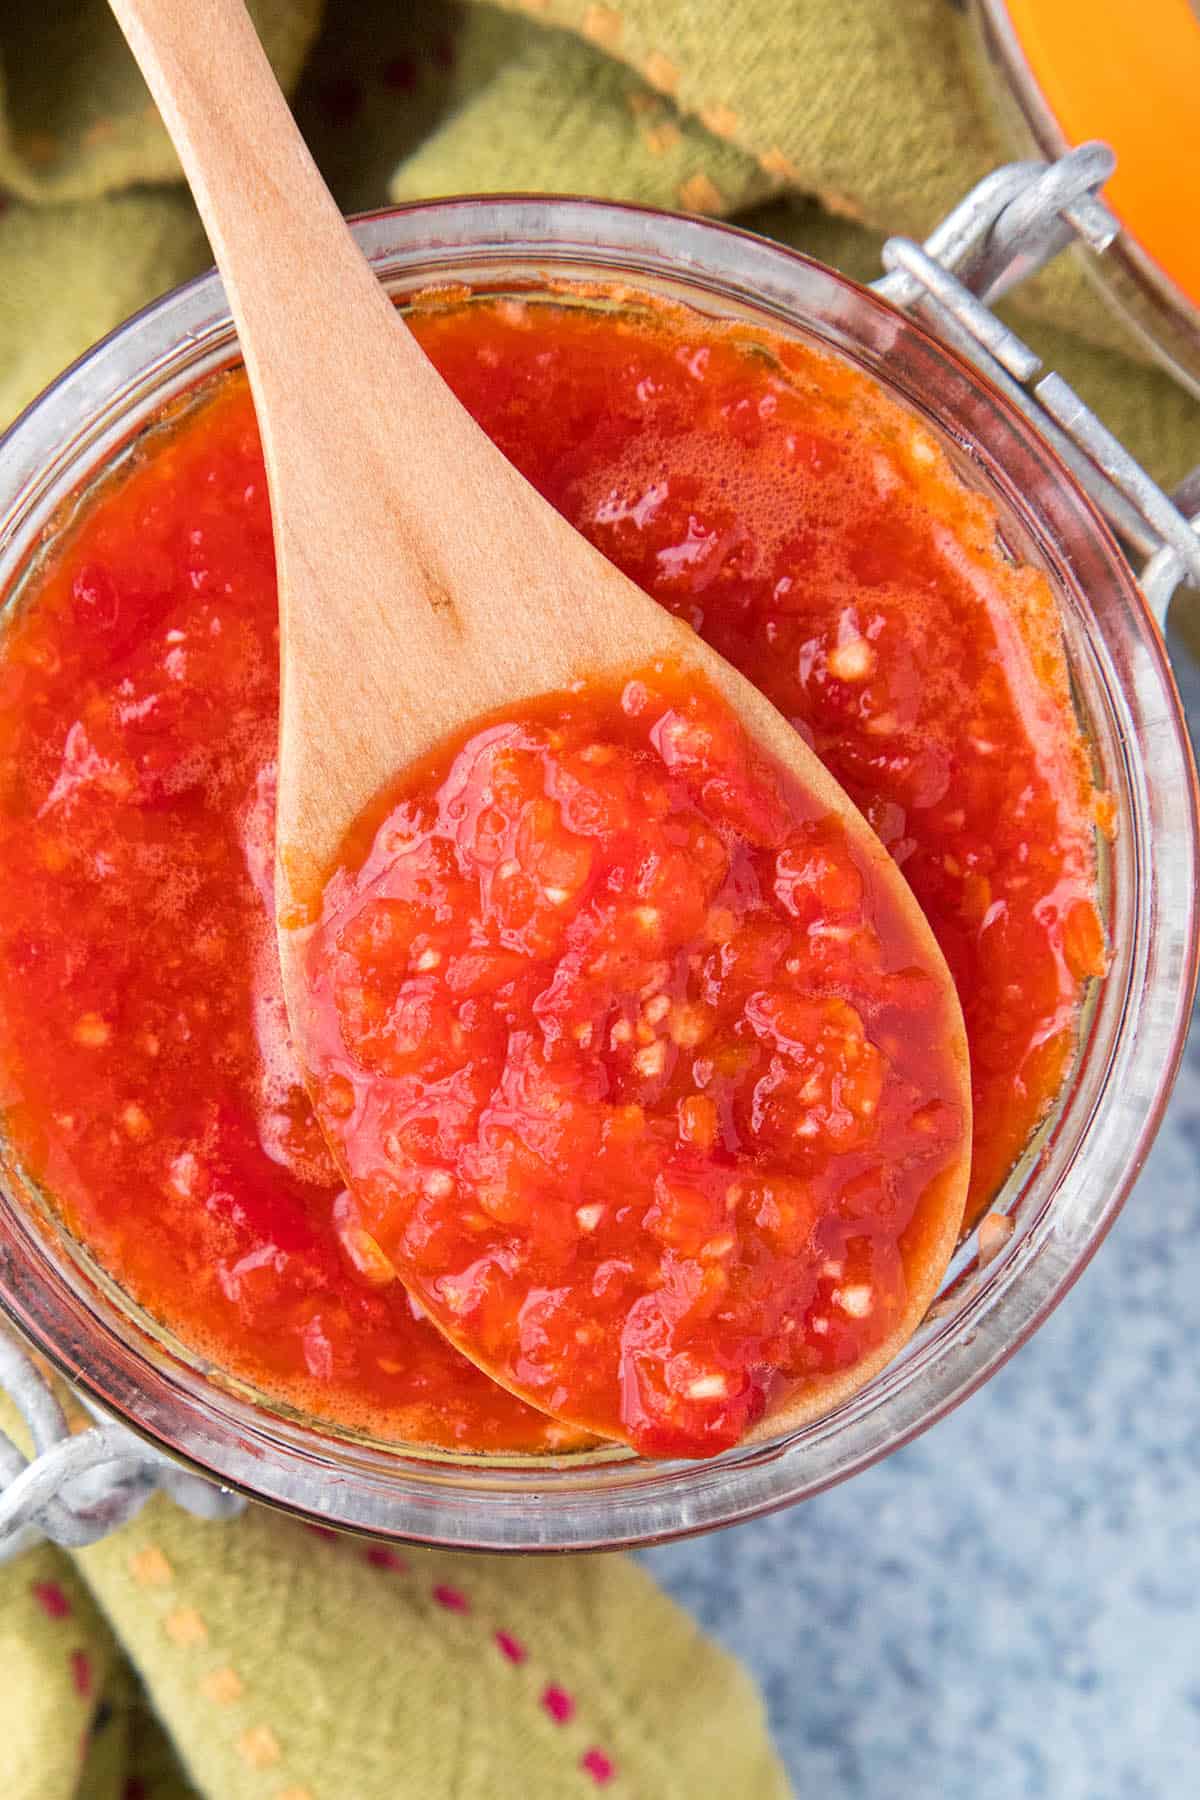 Sambal Oelek on a spoon, ready to add flavor to your dishes